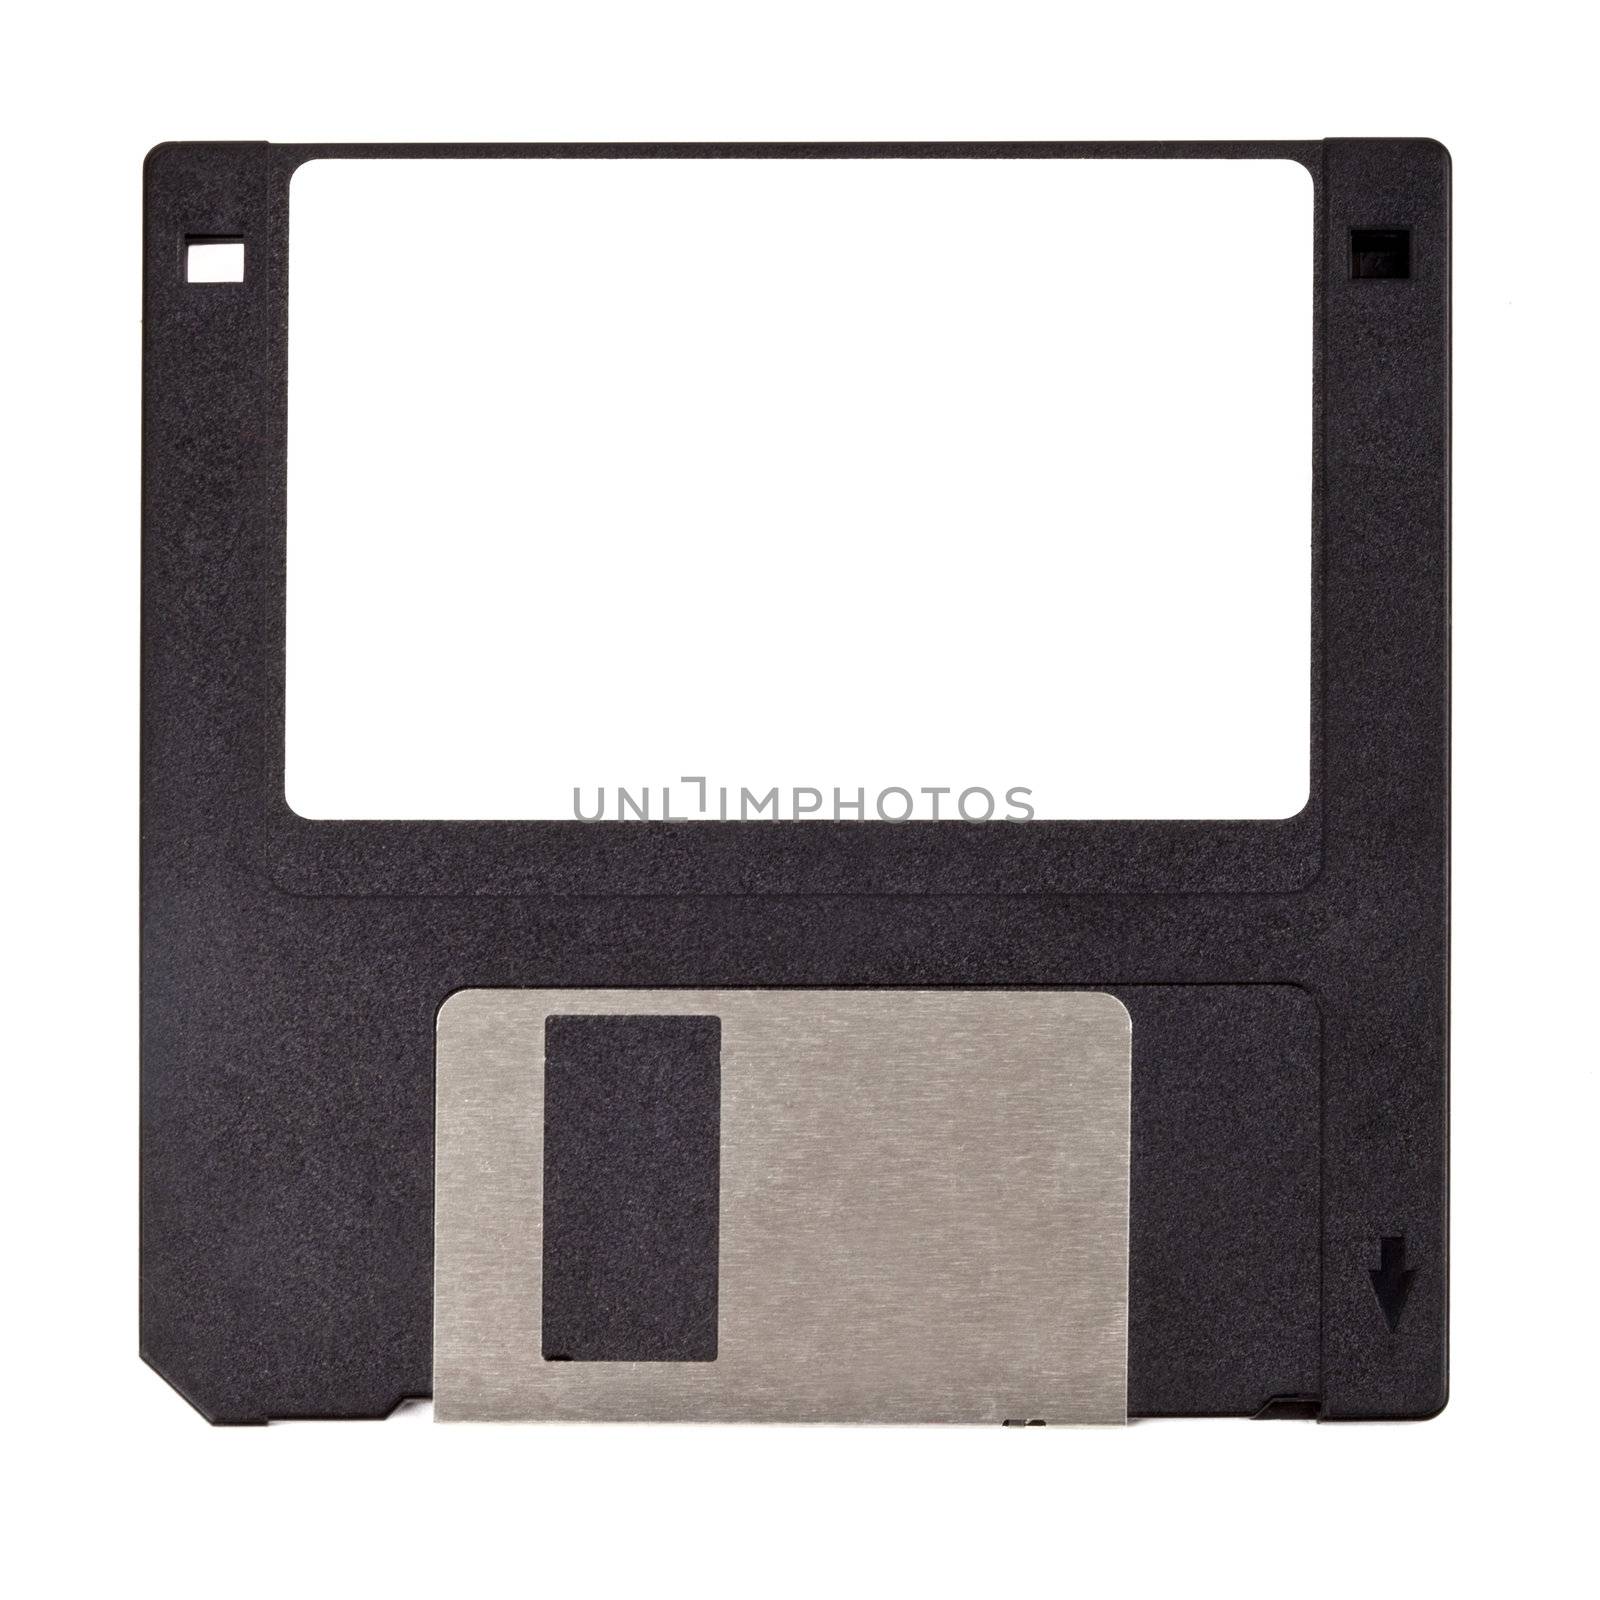 Floppy Disk isolated over a white background.